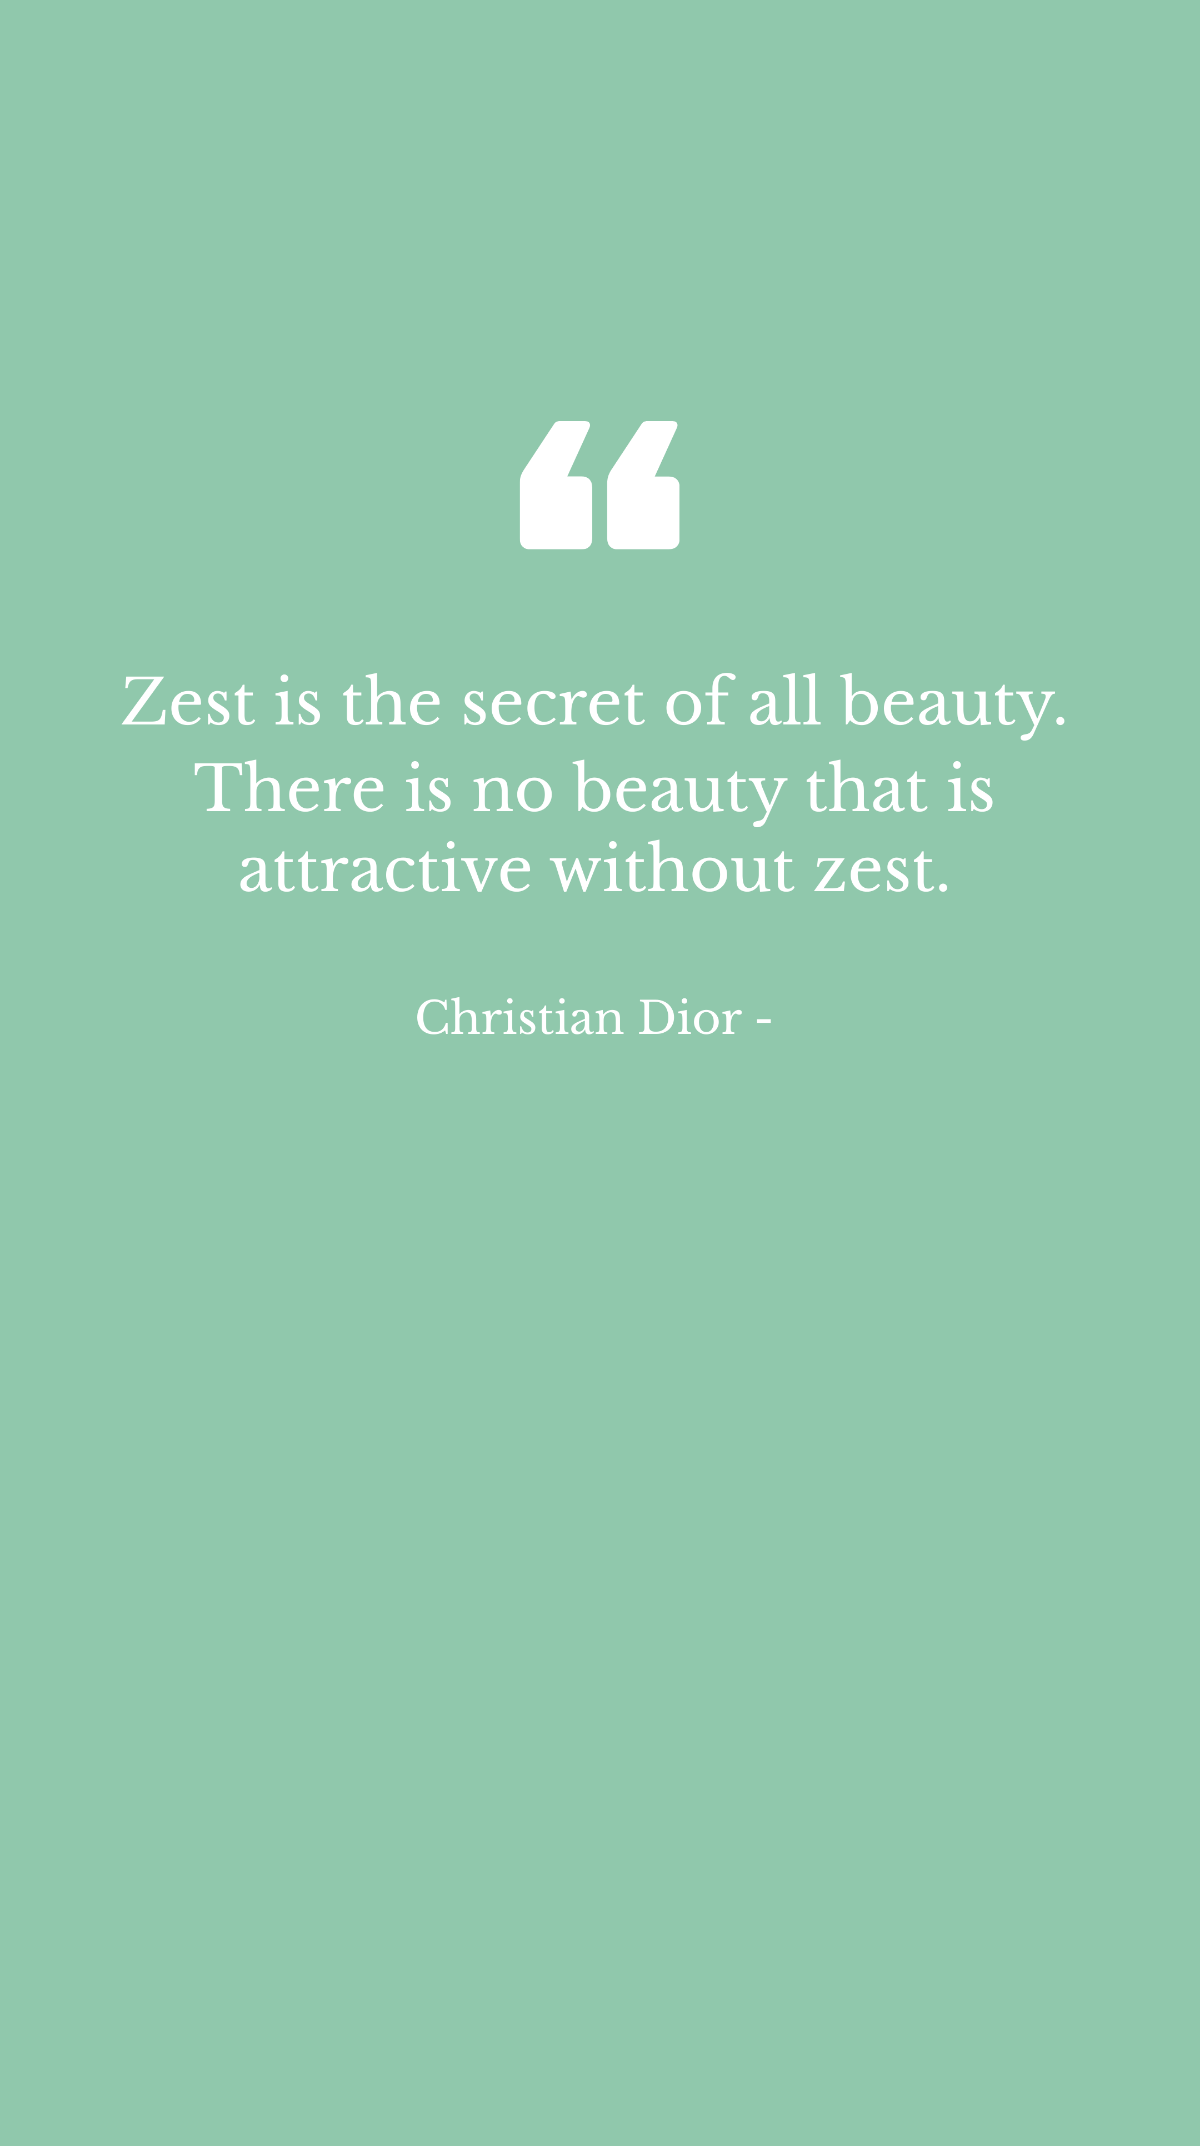 Christian Dior - Zest is the secret of all beauty. There is no beauty that is attractive without zest.